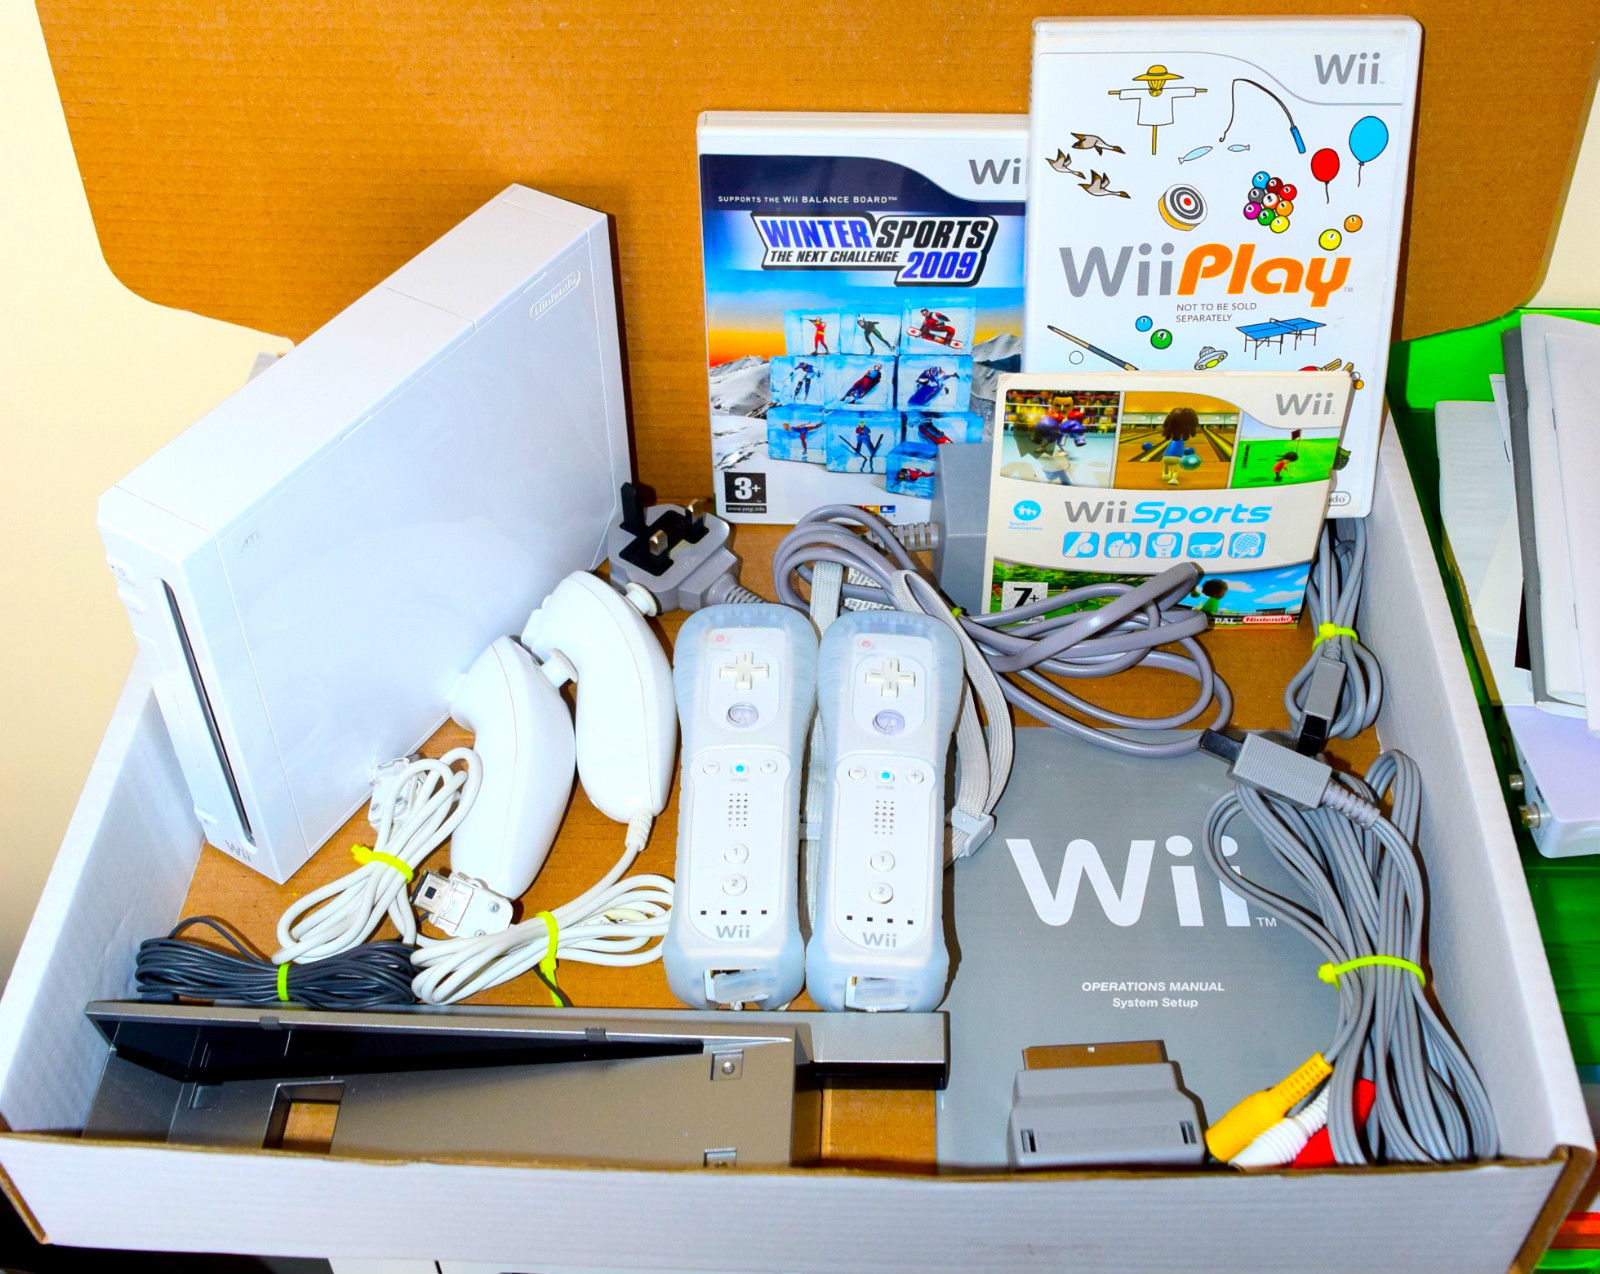 White Nintendo Wii Console 2 Remotes 2 Nunchucks 24 Games Wii Sports & Play+GIFT